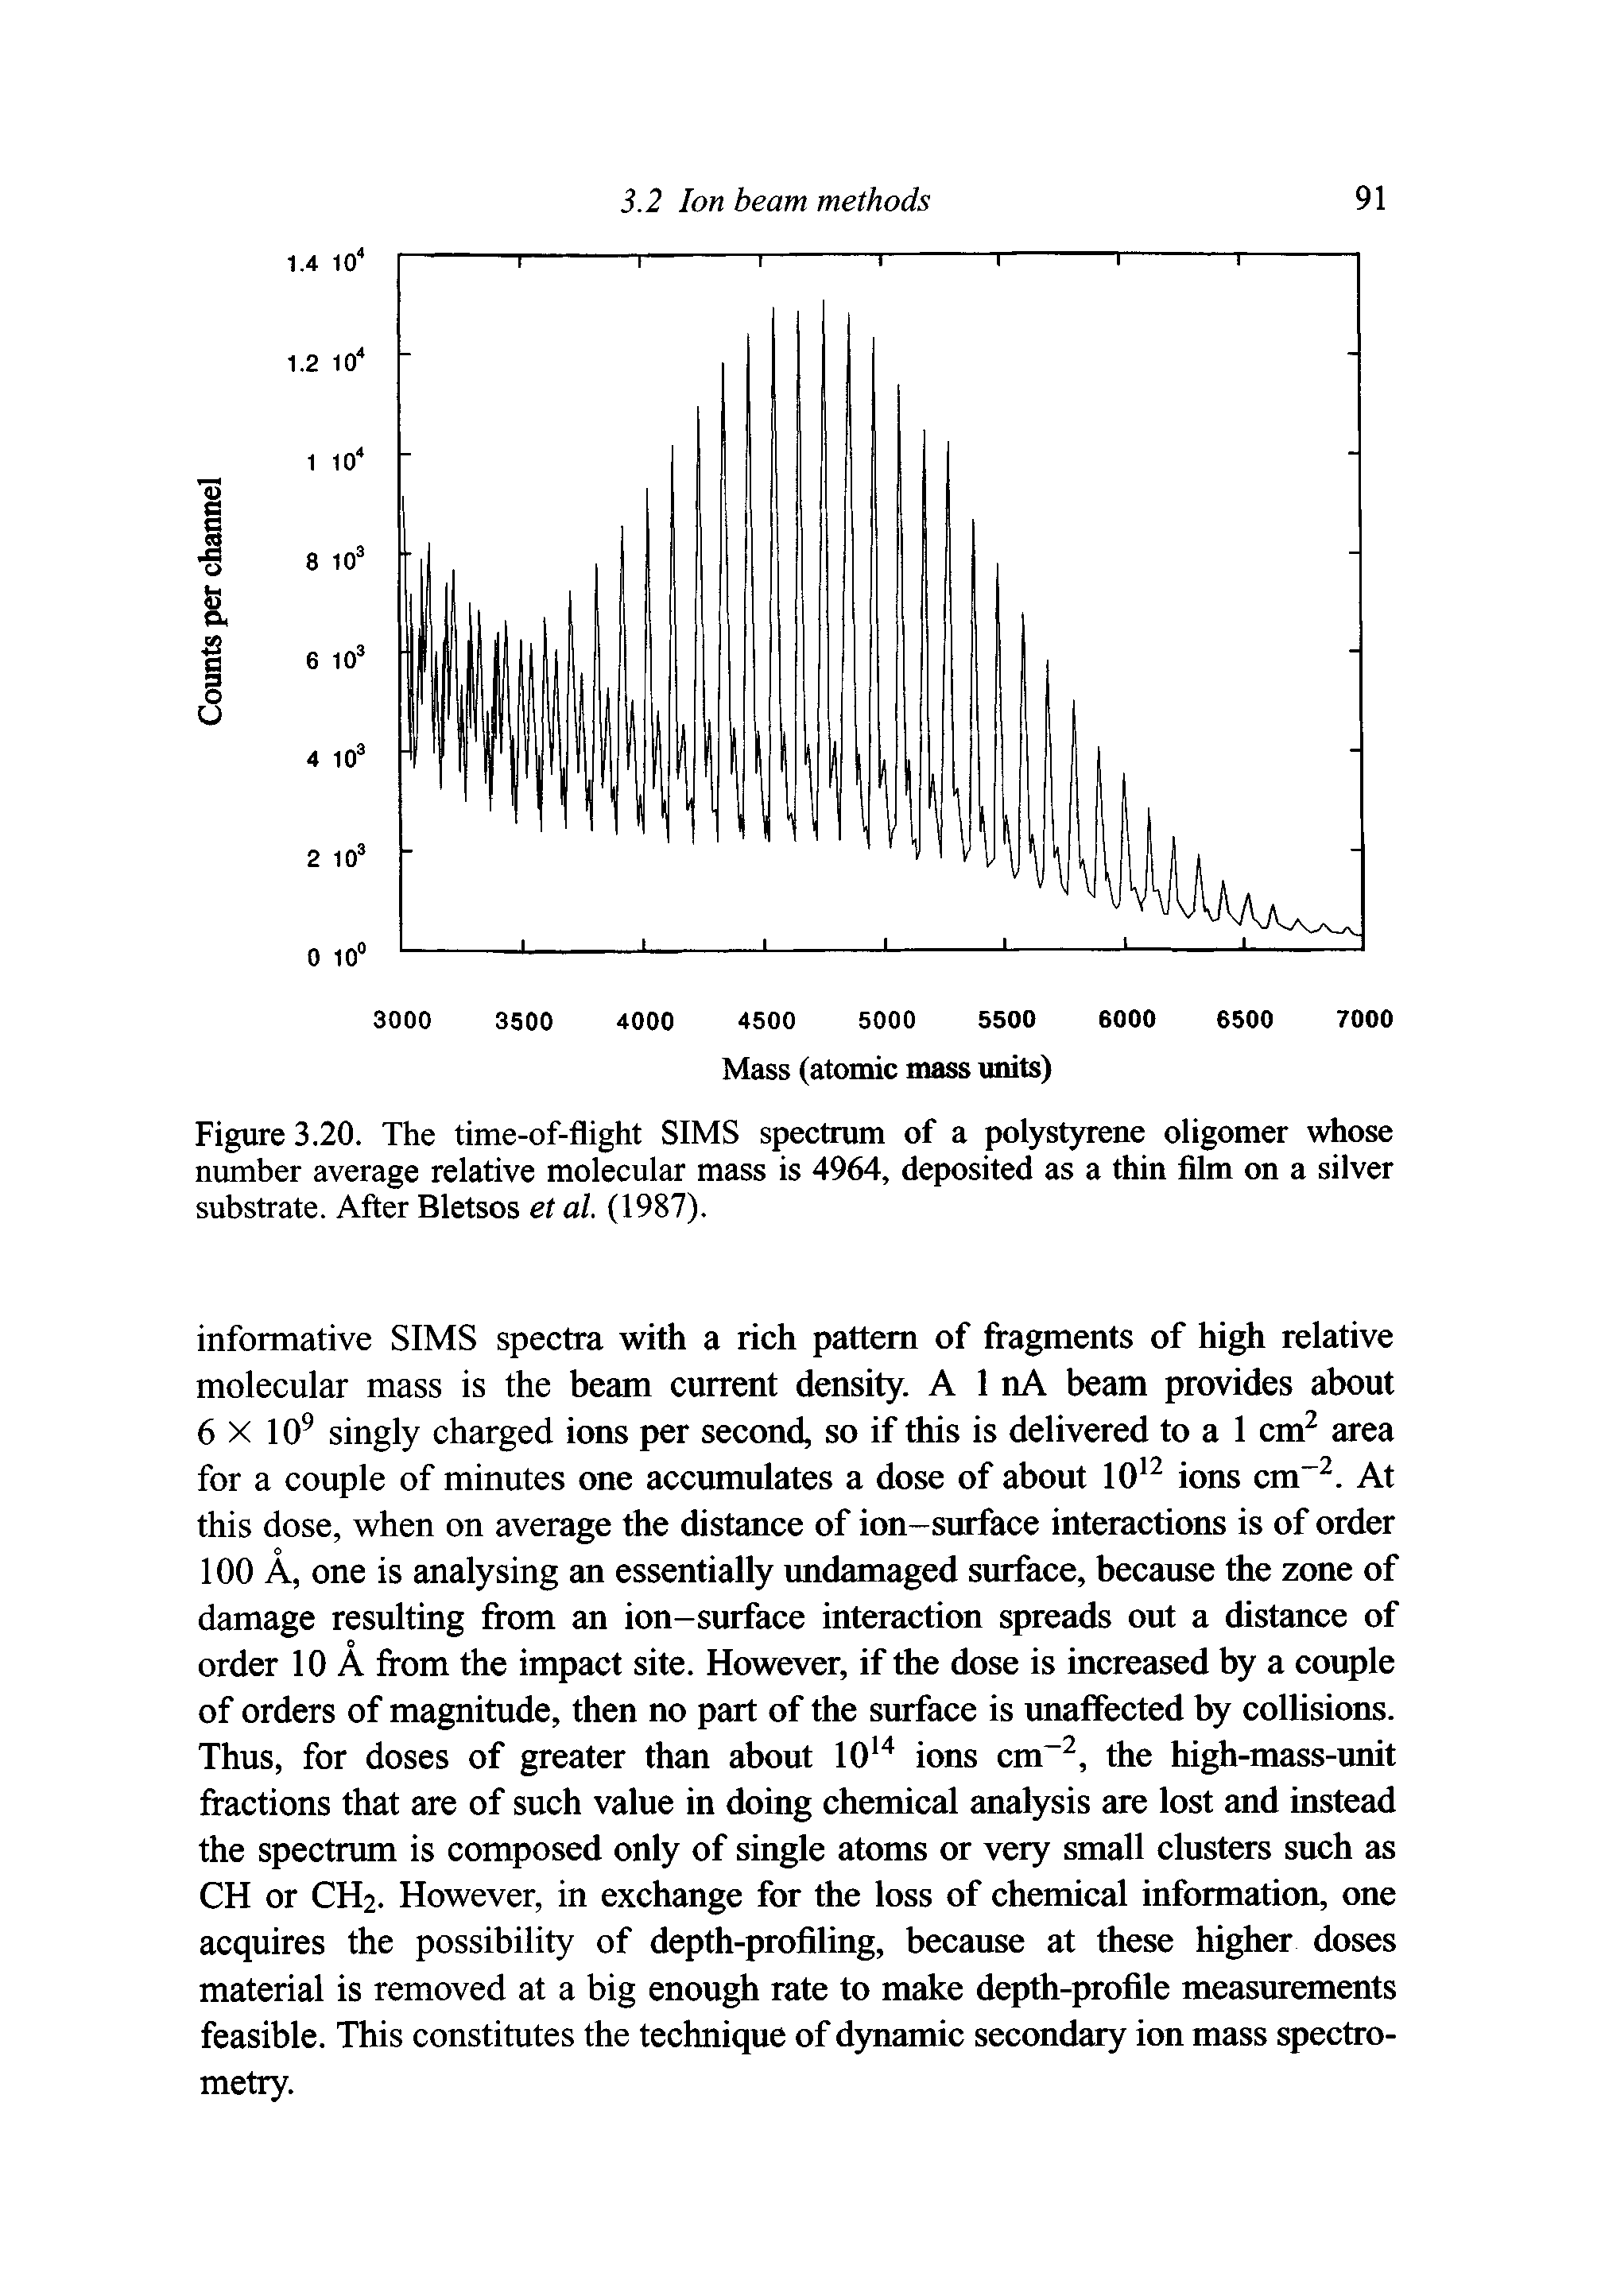 Figure 3.20. The time-of-flight SIMS spectrum of a polystyrene oligomer whose number average relative molecular mass is 4964, deposited as a thin film on a silver substrate. After Bletsos et al. (1987).